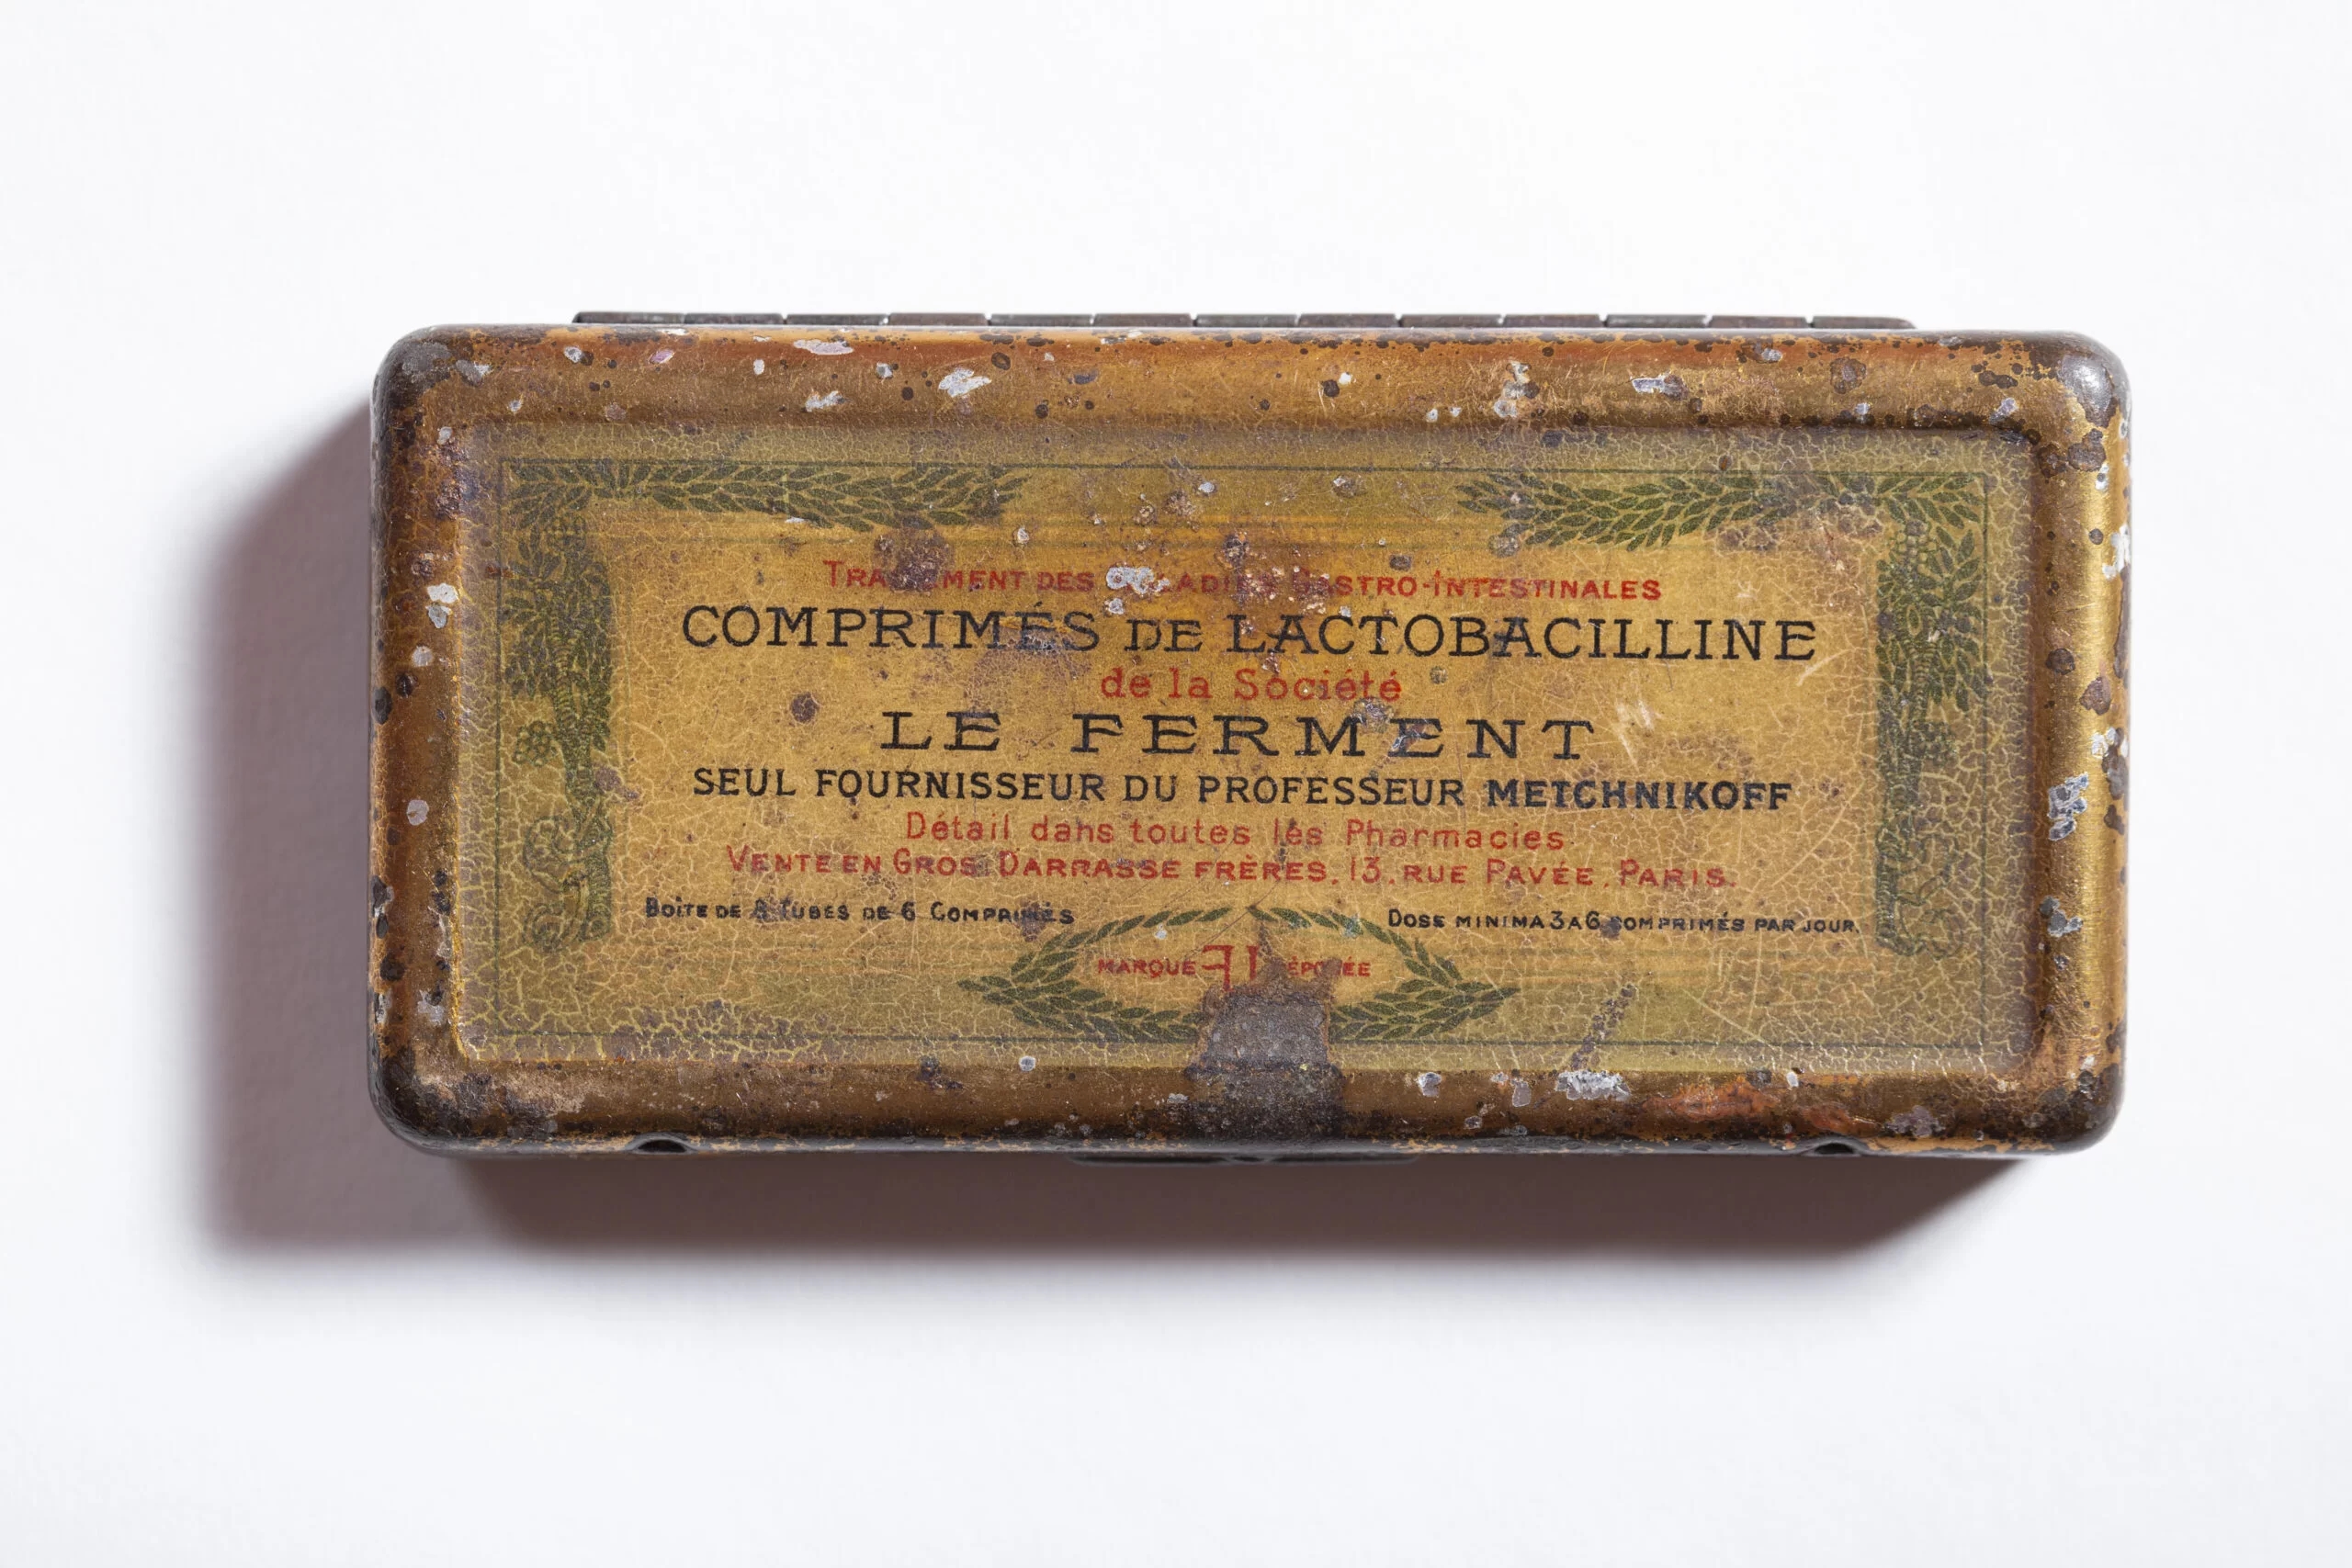 A brown, rectangular metal tin box with a tattered product information label on top.